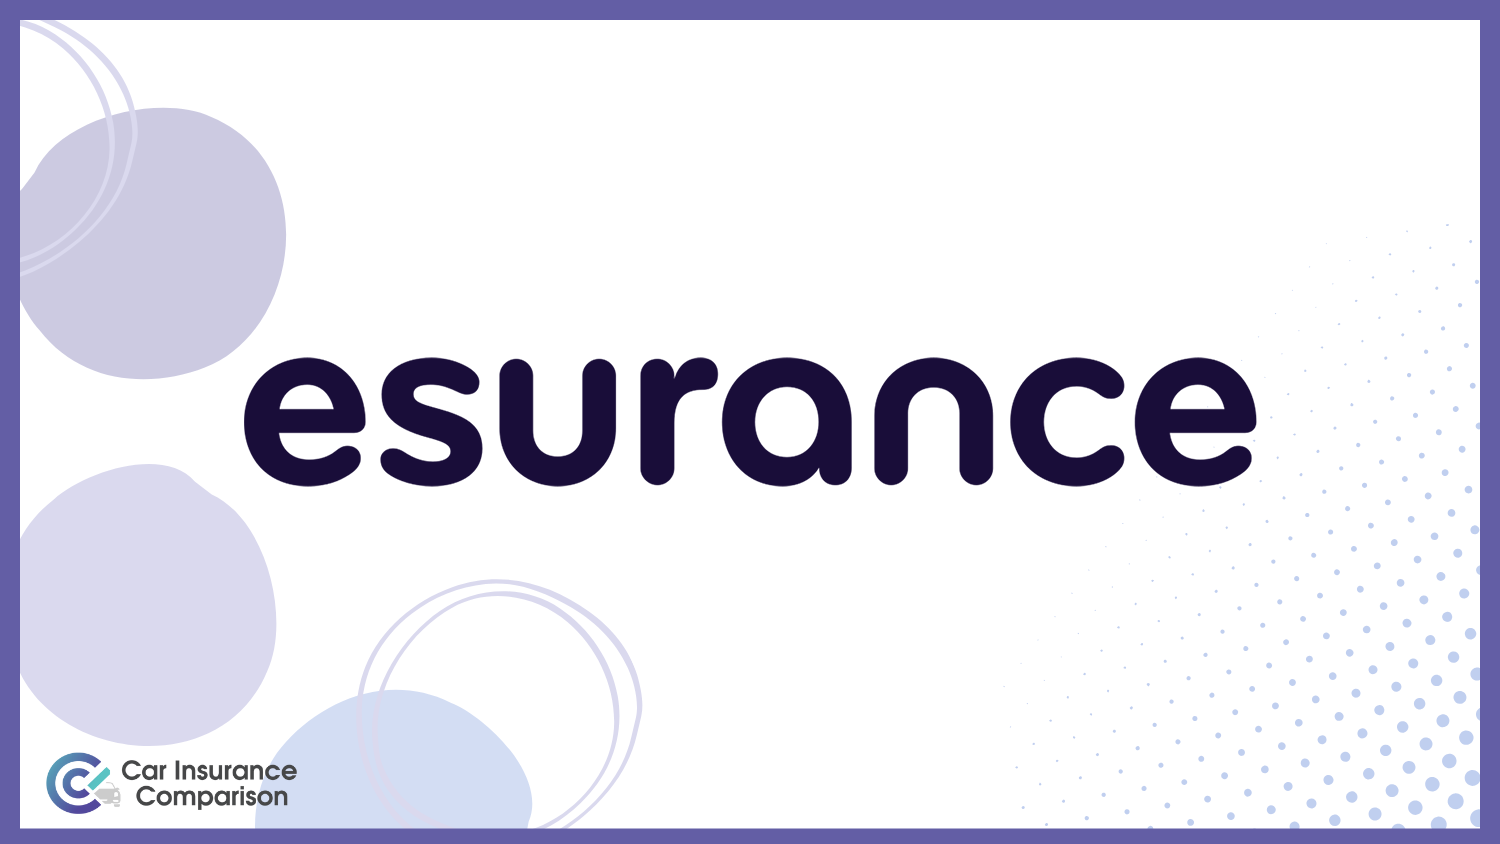 Esurance: Best Car Insurance for Students